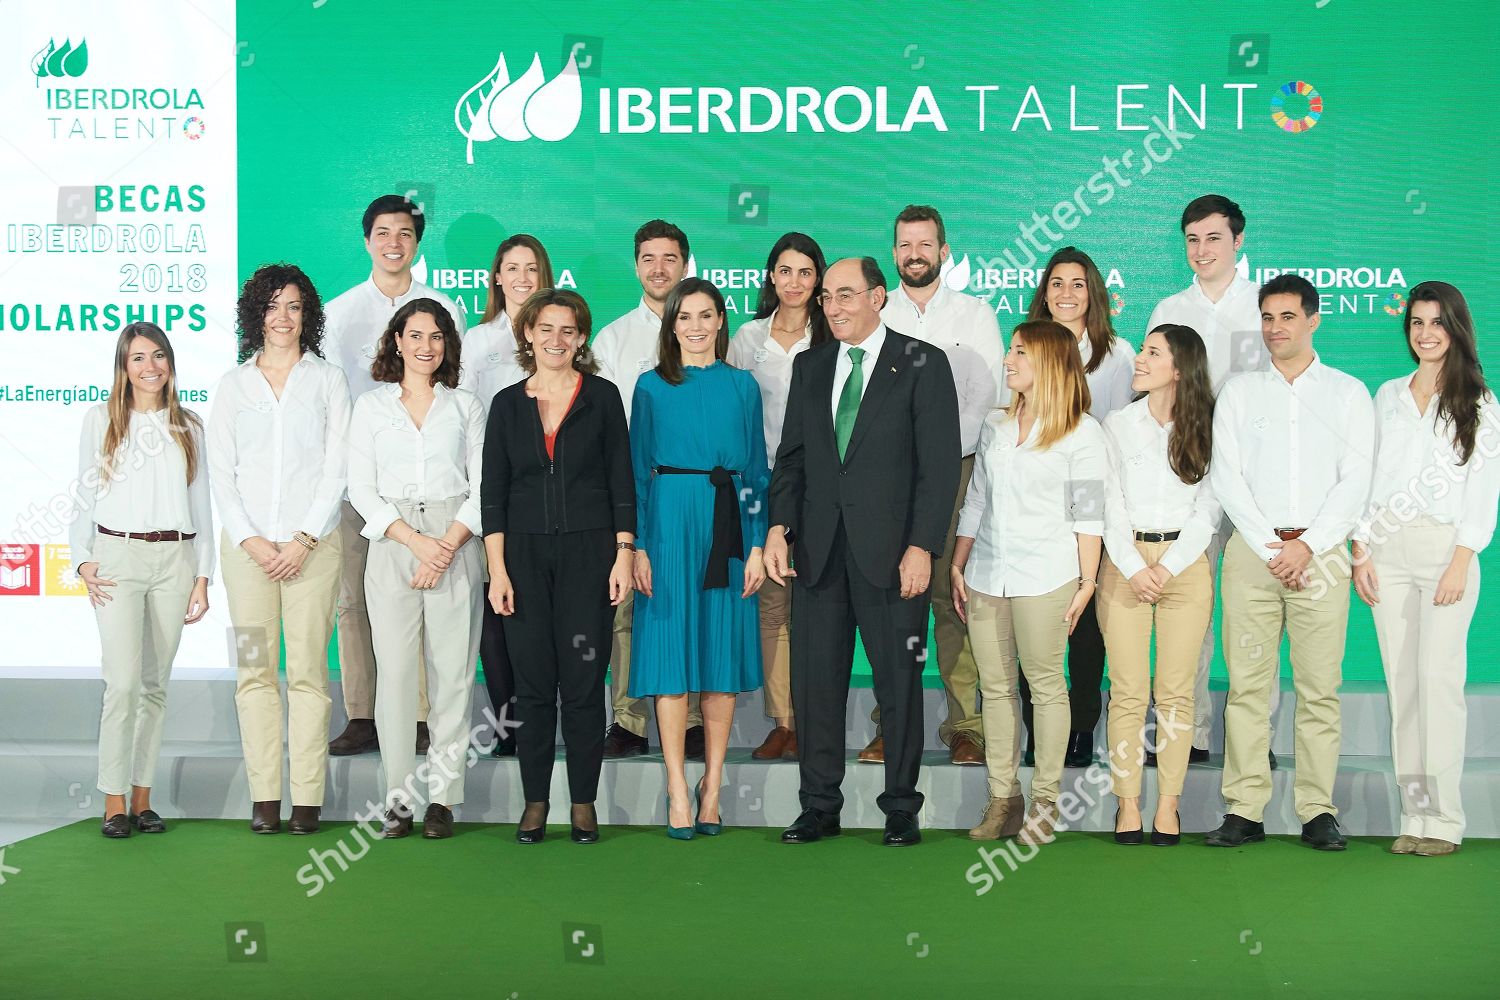 delivery-of-the-grants-for-masters-and-research-aid-of-the-fundacion-iberdrola-madrid-spain-shutterstock-editorial-10079598v.jpg